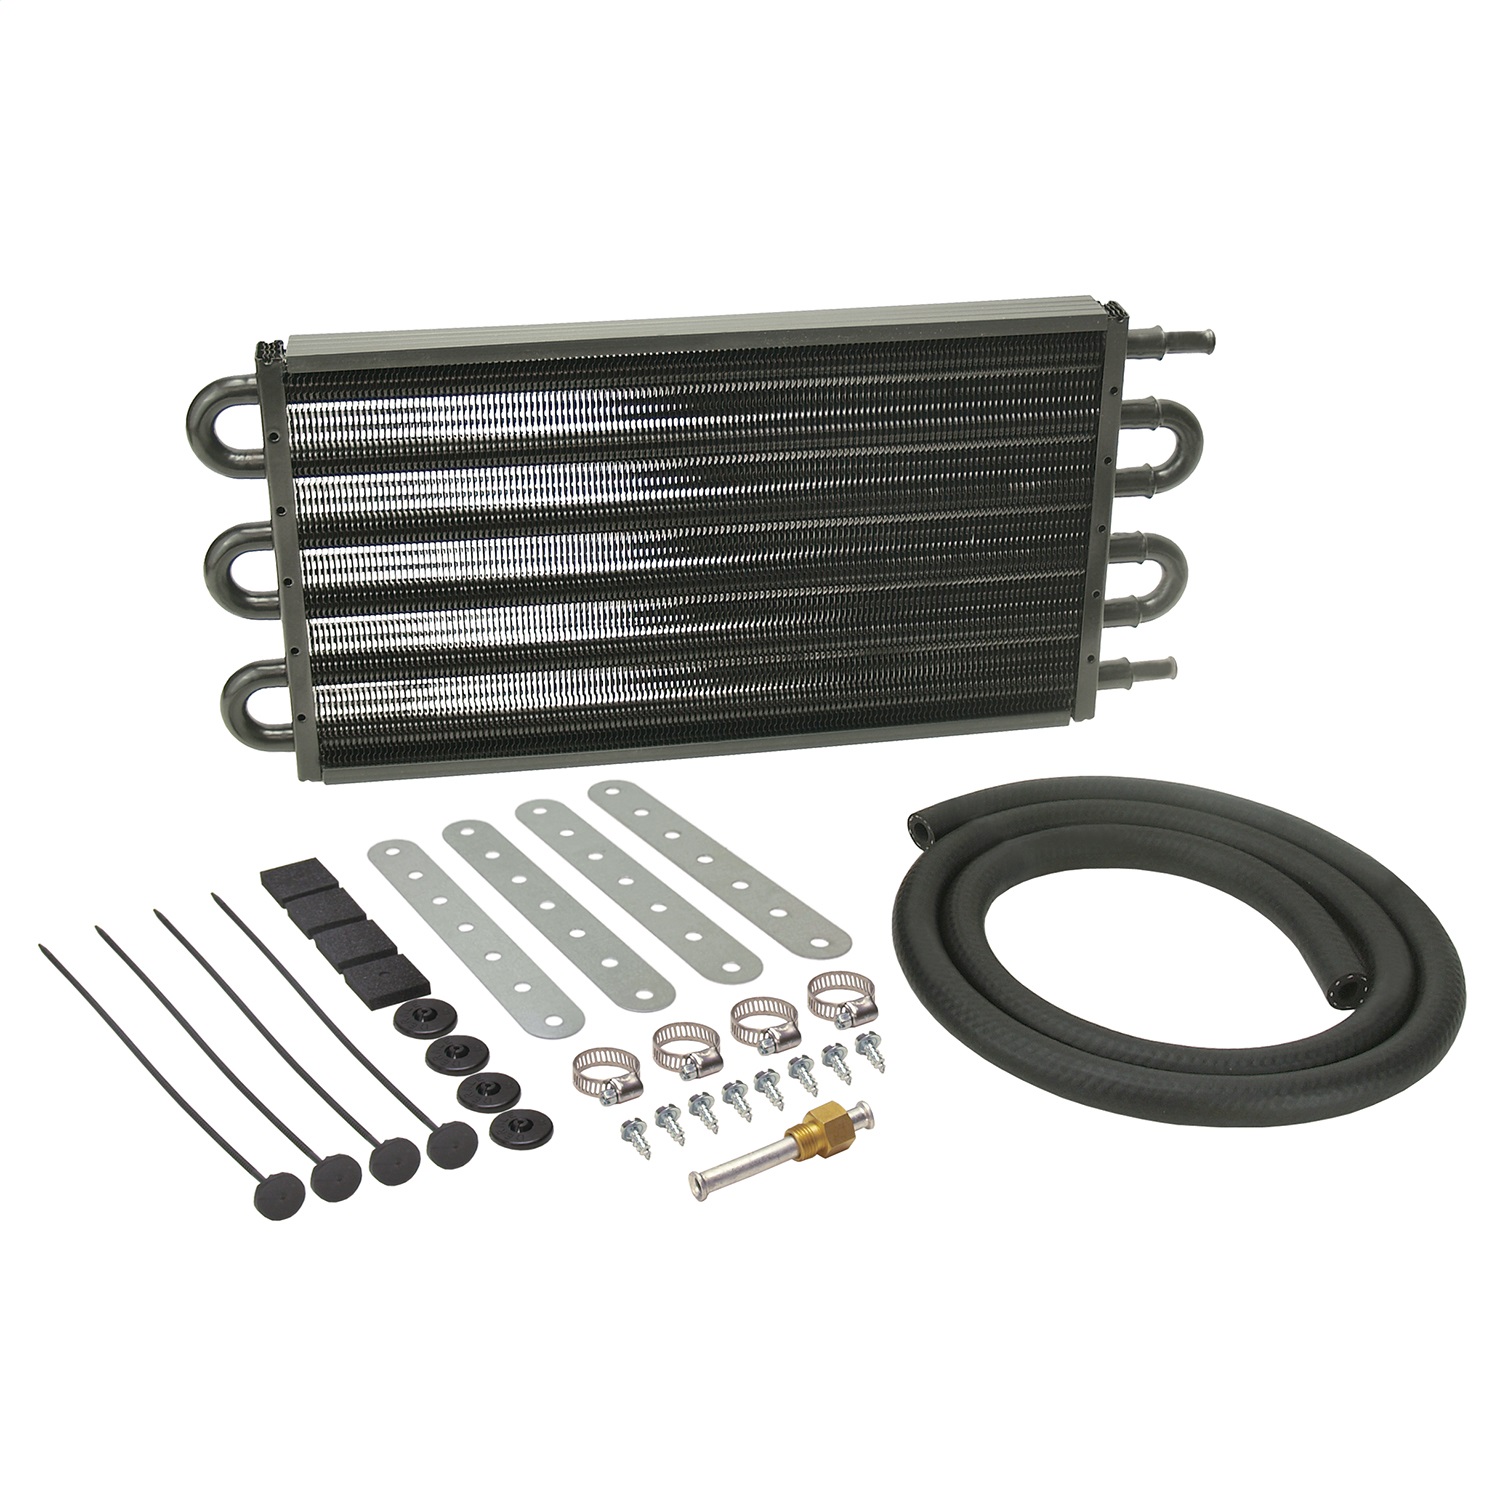 Derale 13225 Cooler Kit for Automatic Transmission Fluid Made of Aluminum